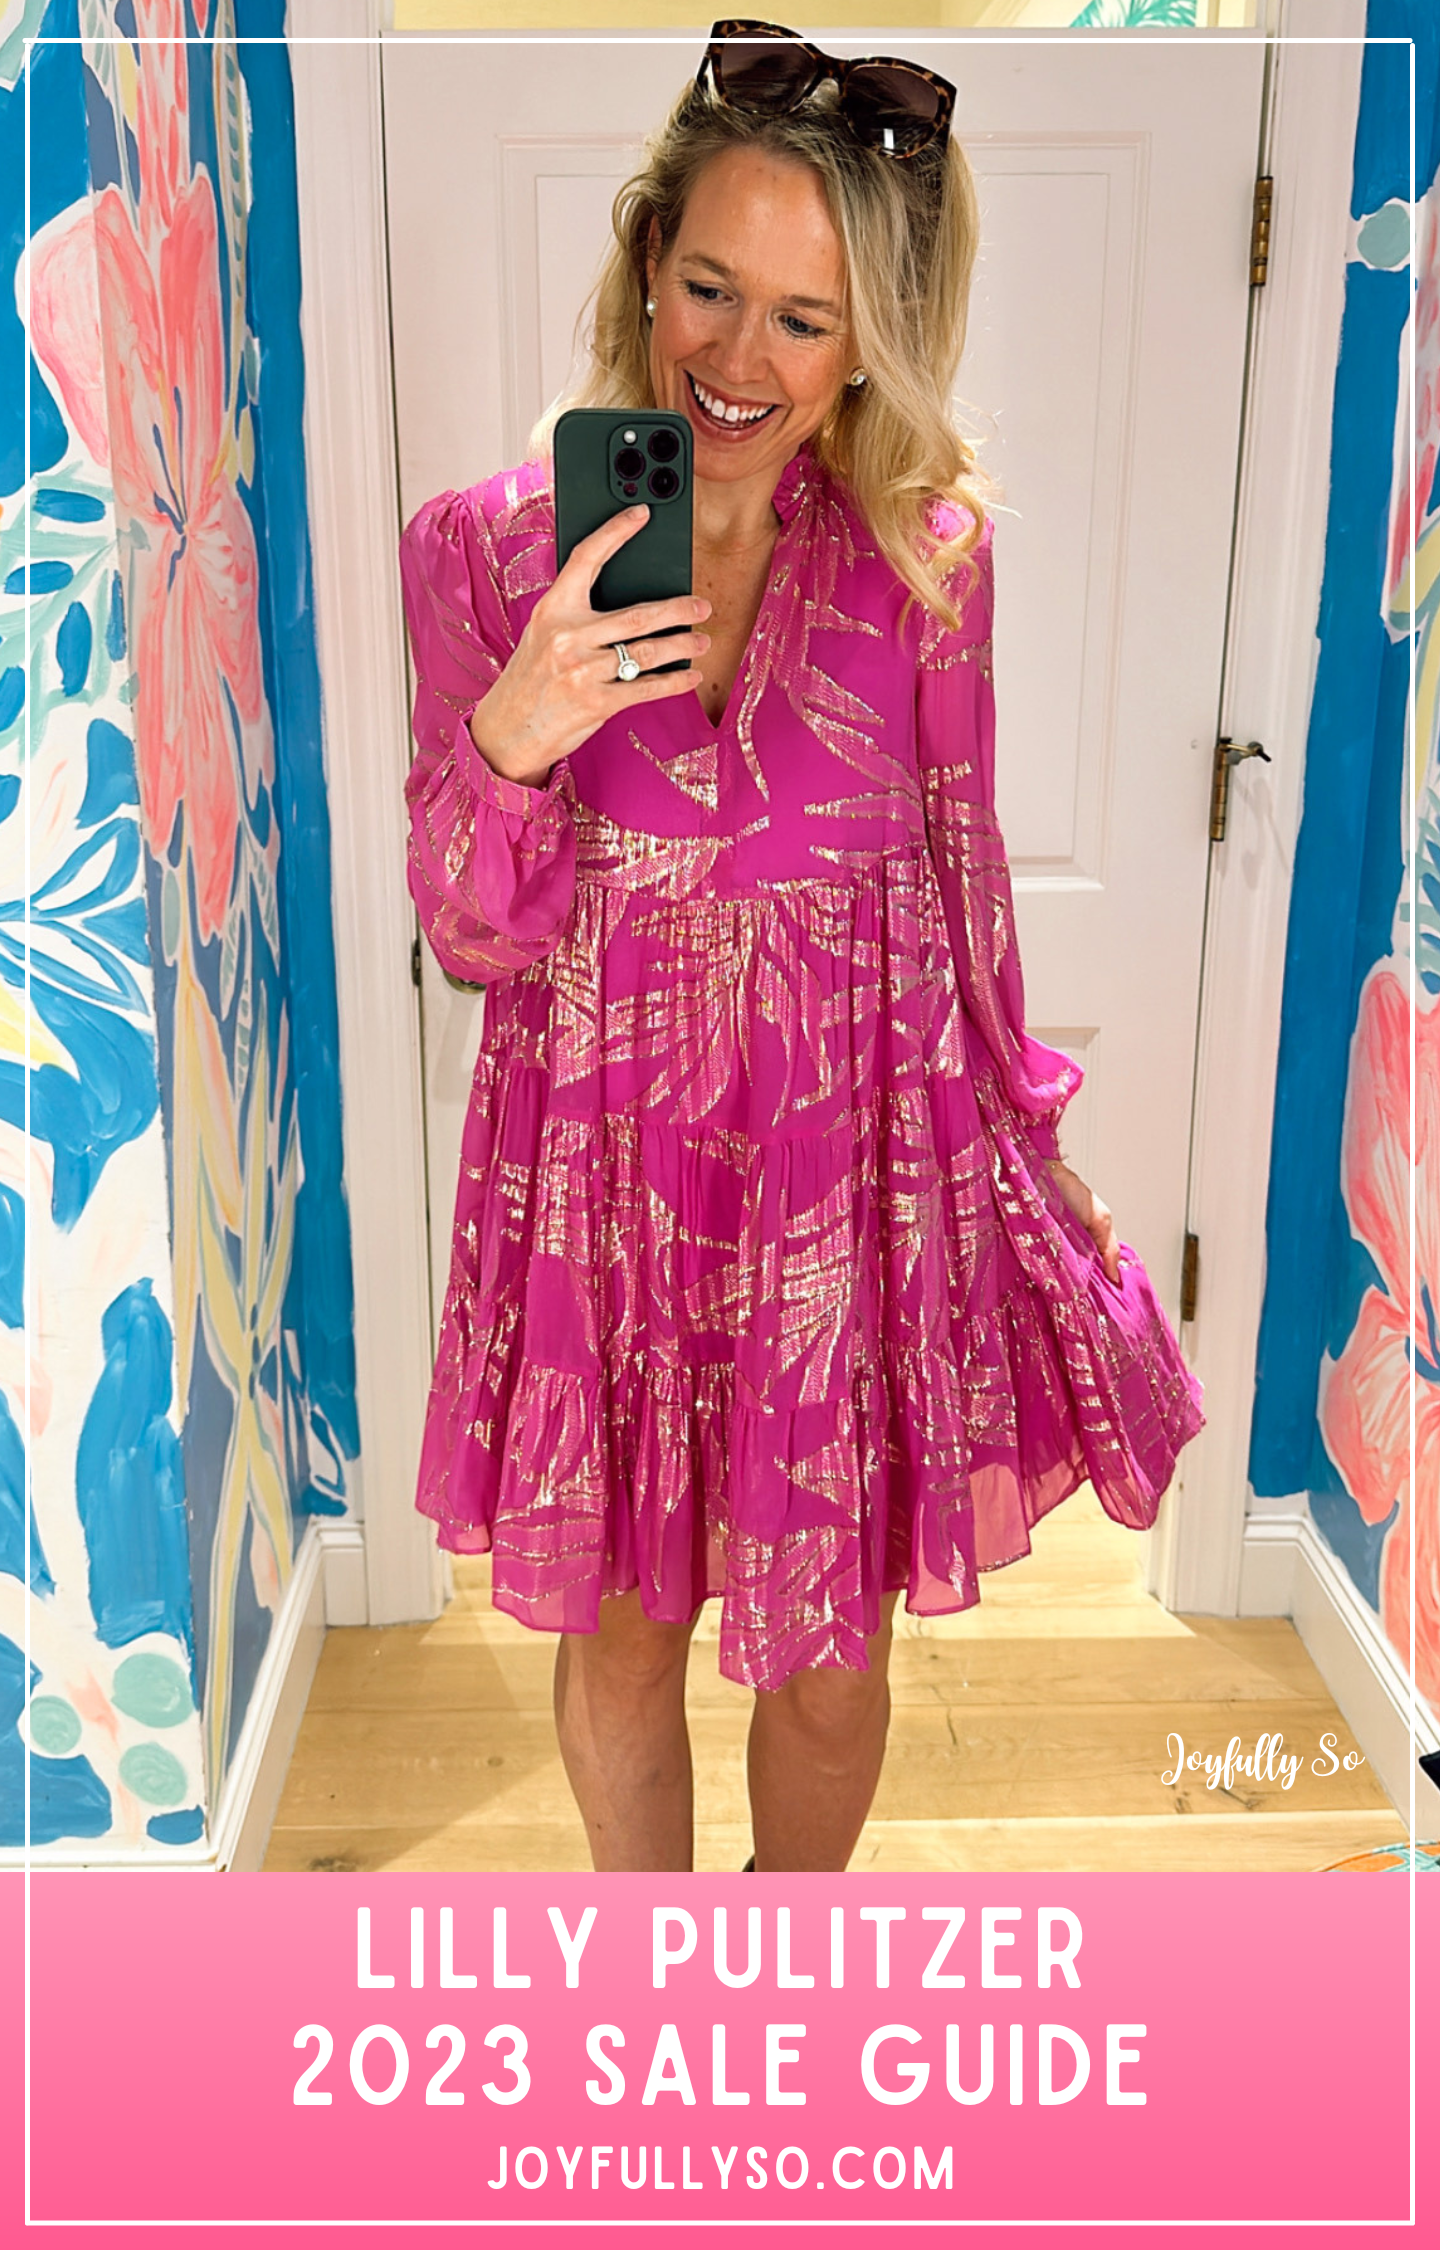 Winter 2023 Lilly Pulitzer Sale Guide - 3  Massive List of Sale Items -  joyfully so